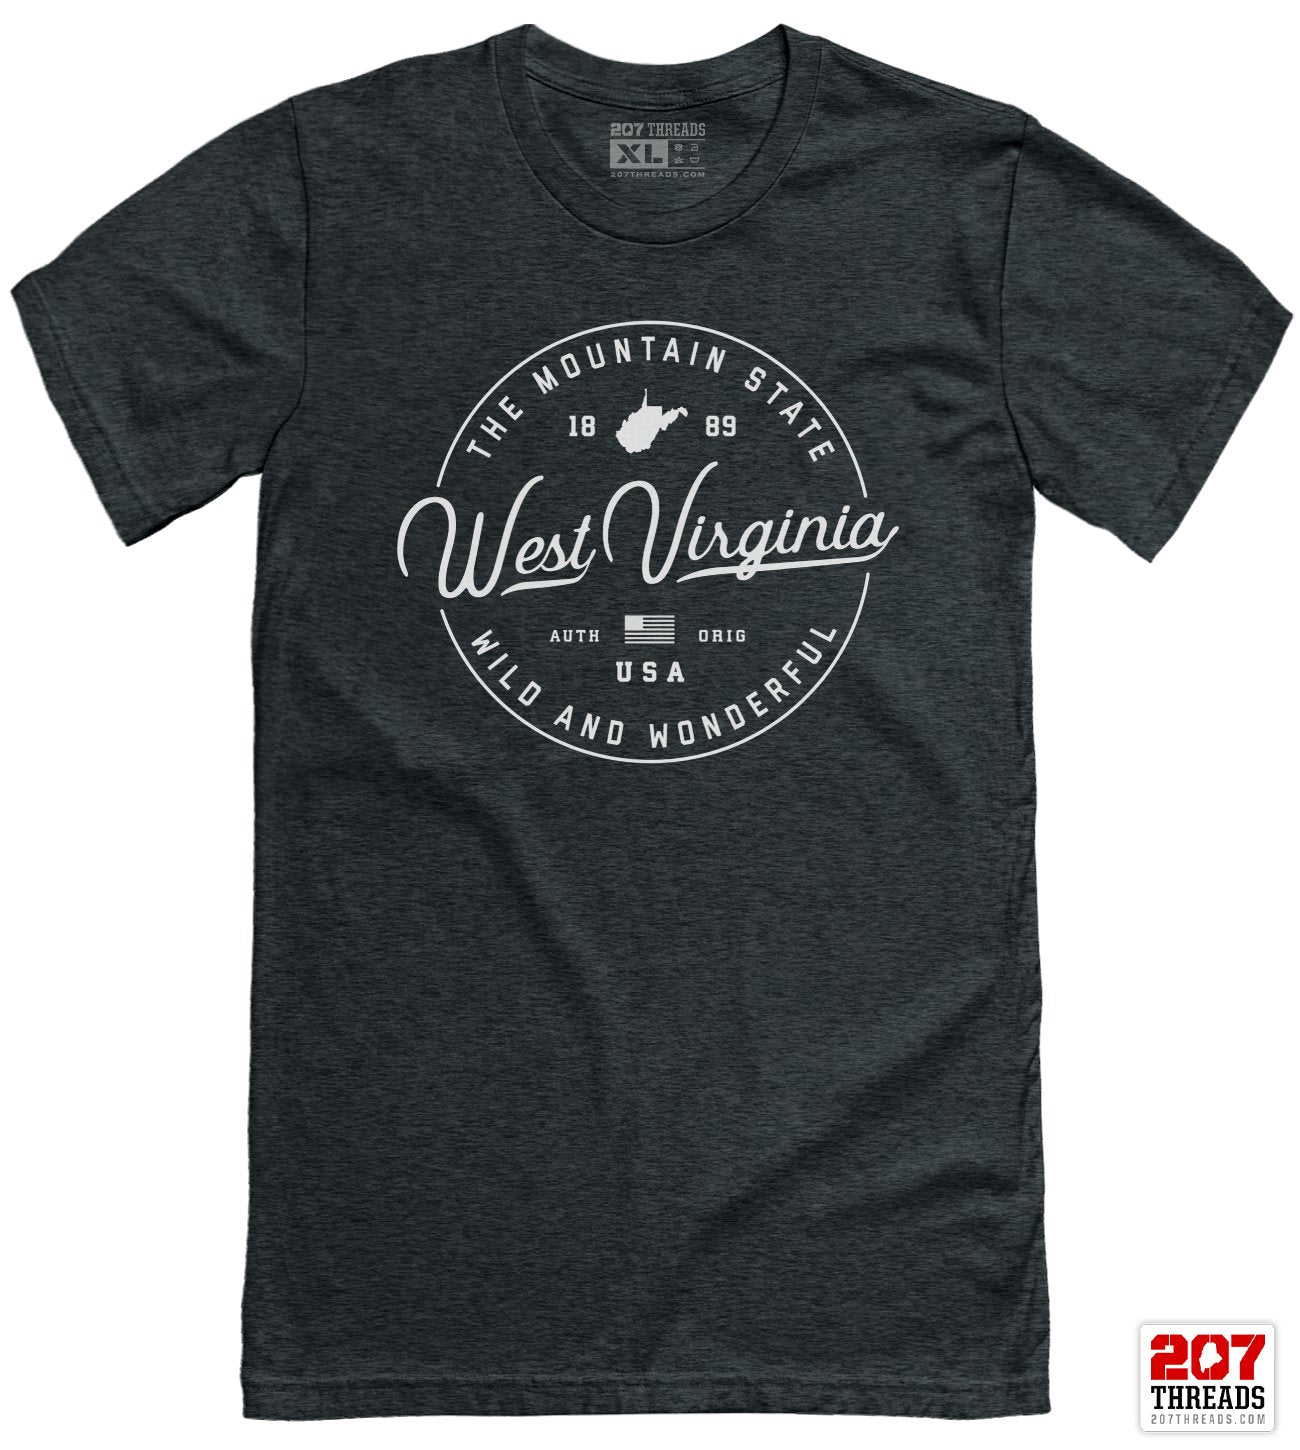 State of West Virginia T-Shirt - The West Virginia Vacation Tee